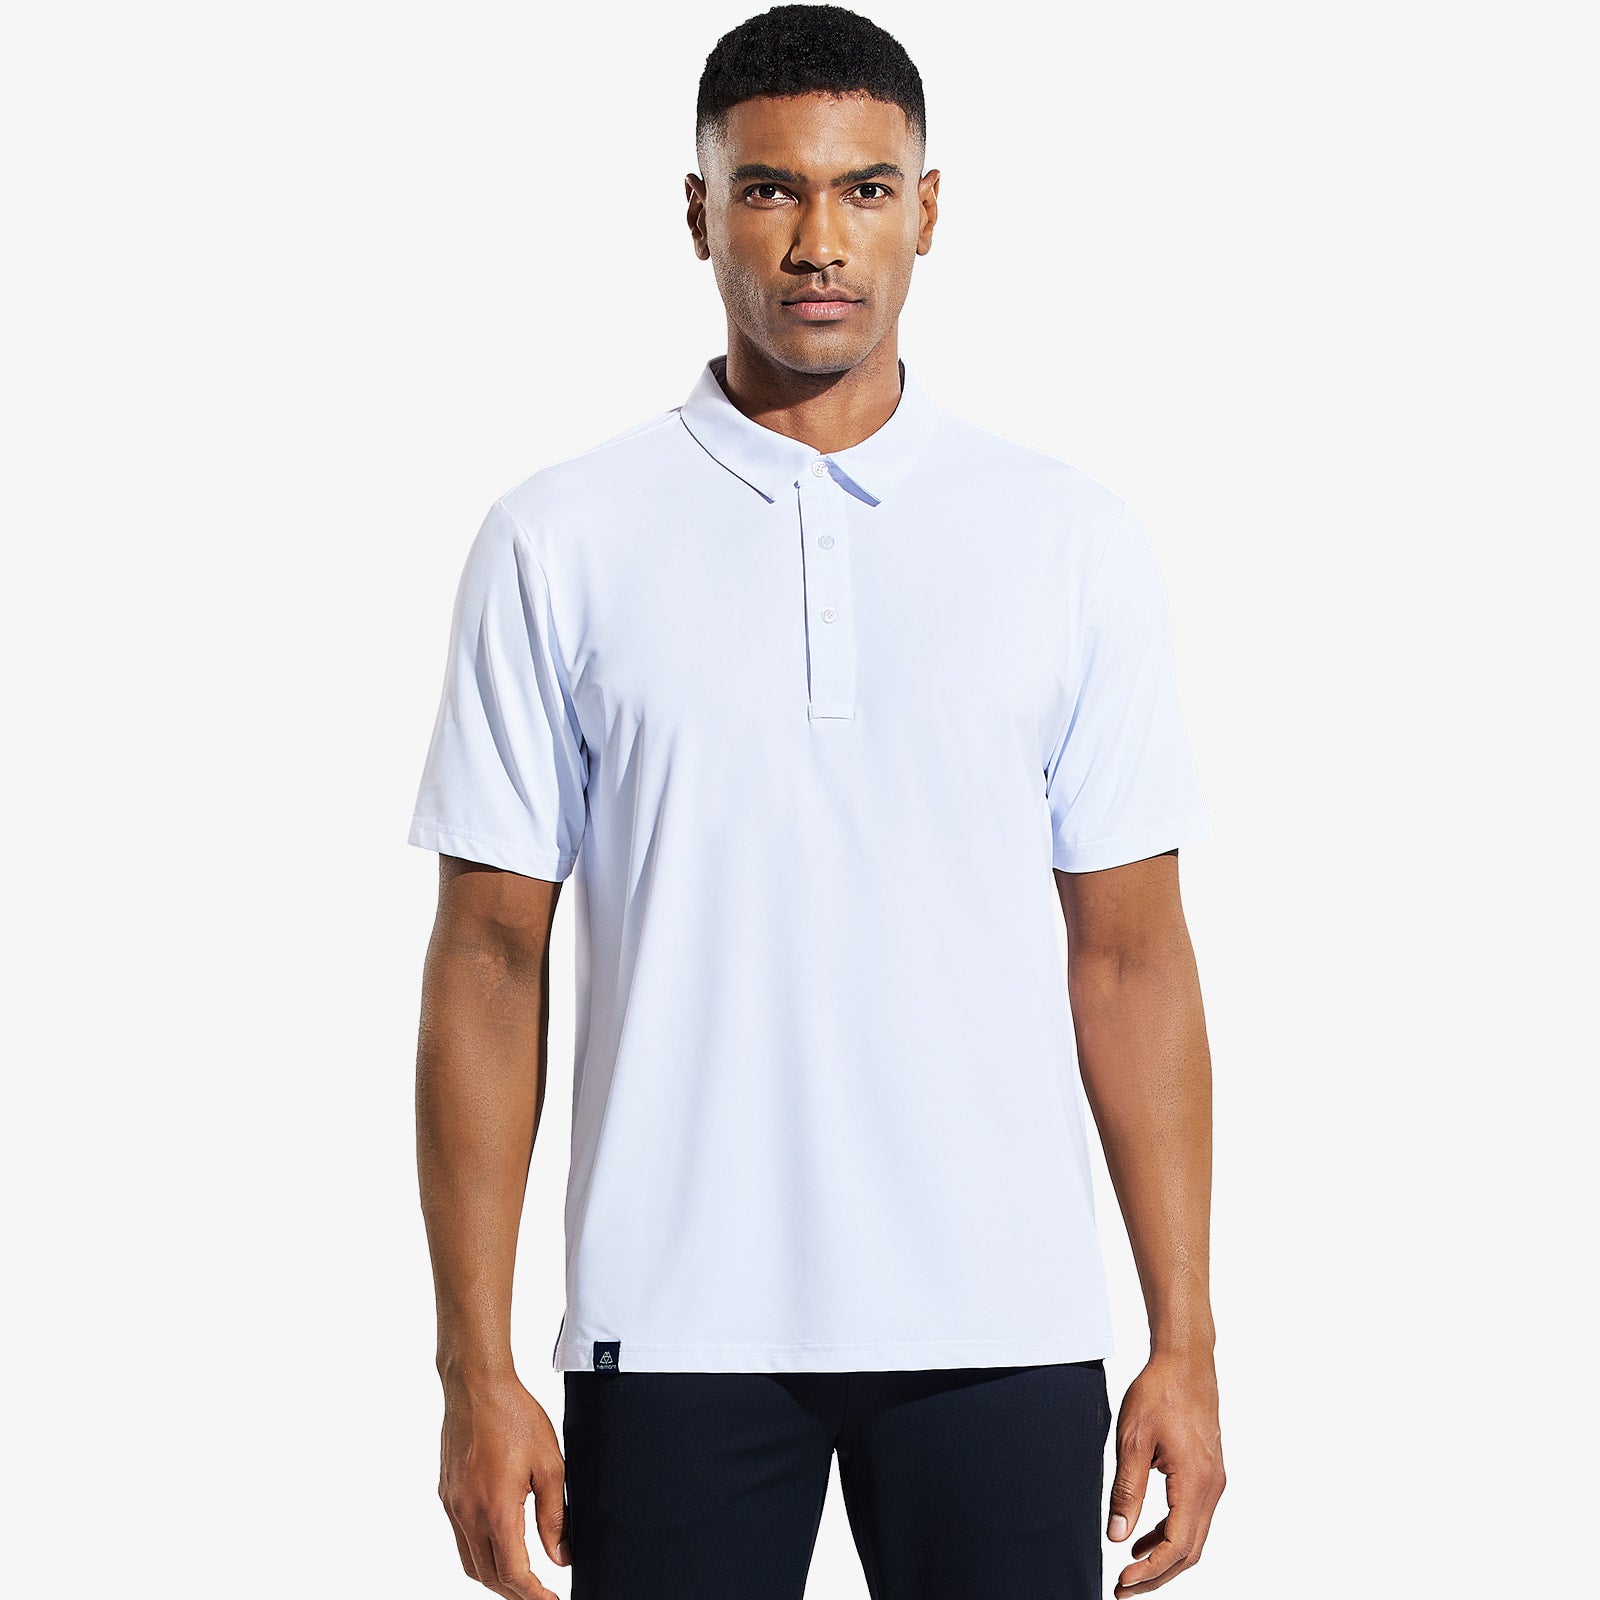 Haimont Men's Polo Shirts Dry Fit Collared Golf T-Shirts